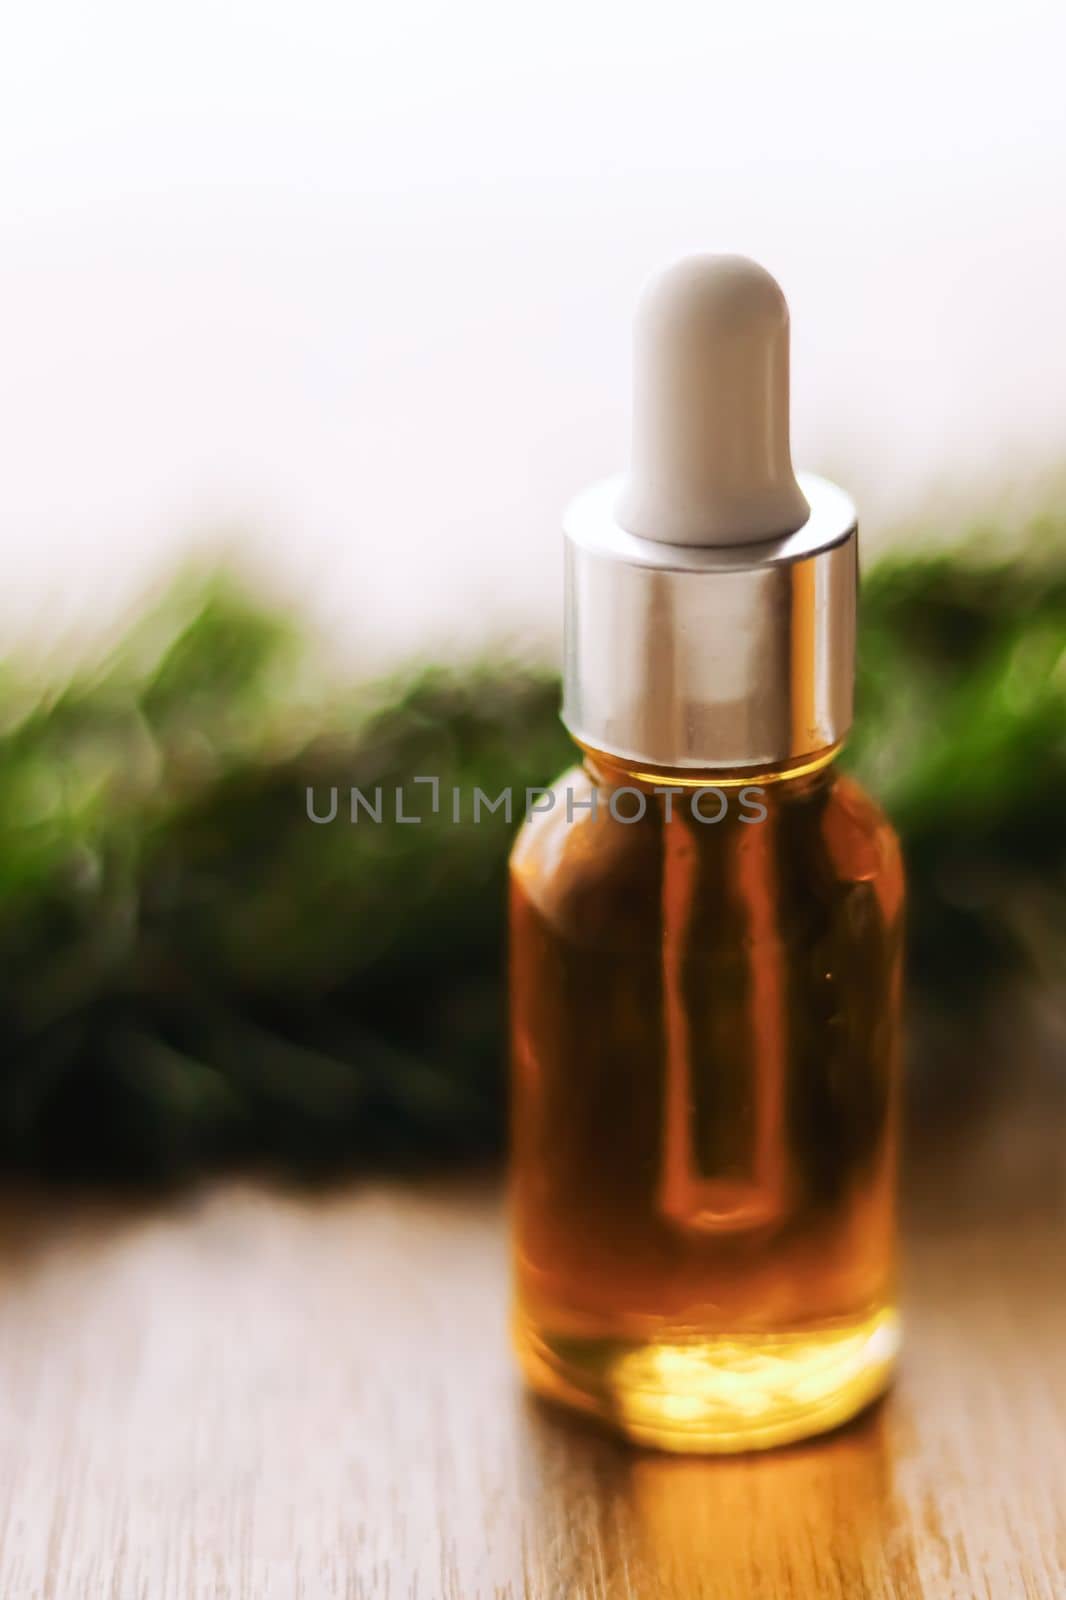 Organic oil serum bottle, beauty and skincare product by Anneleven